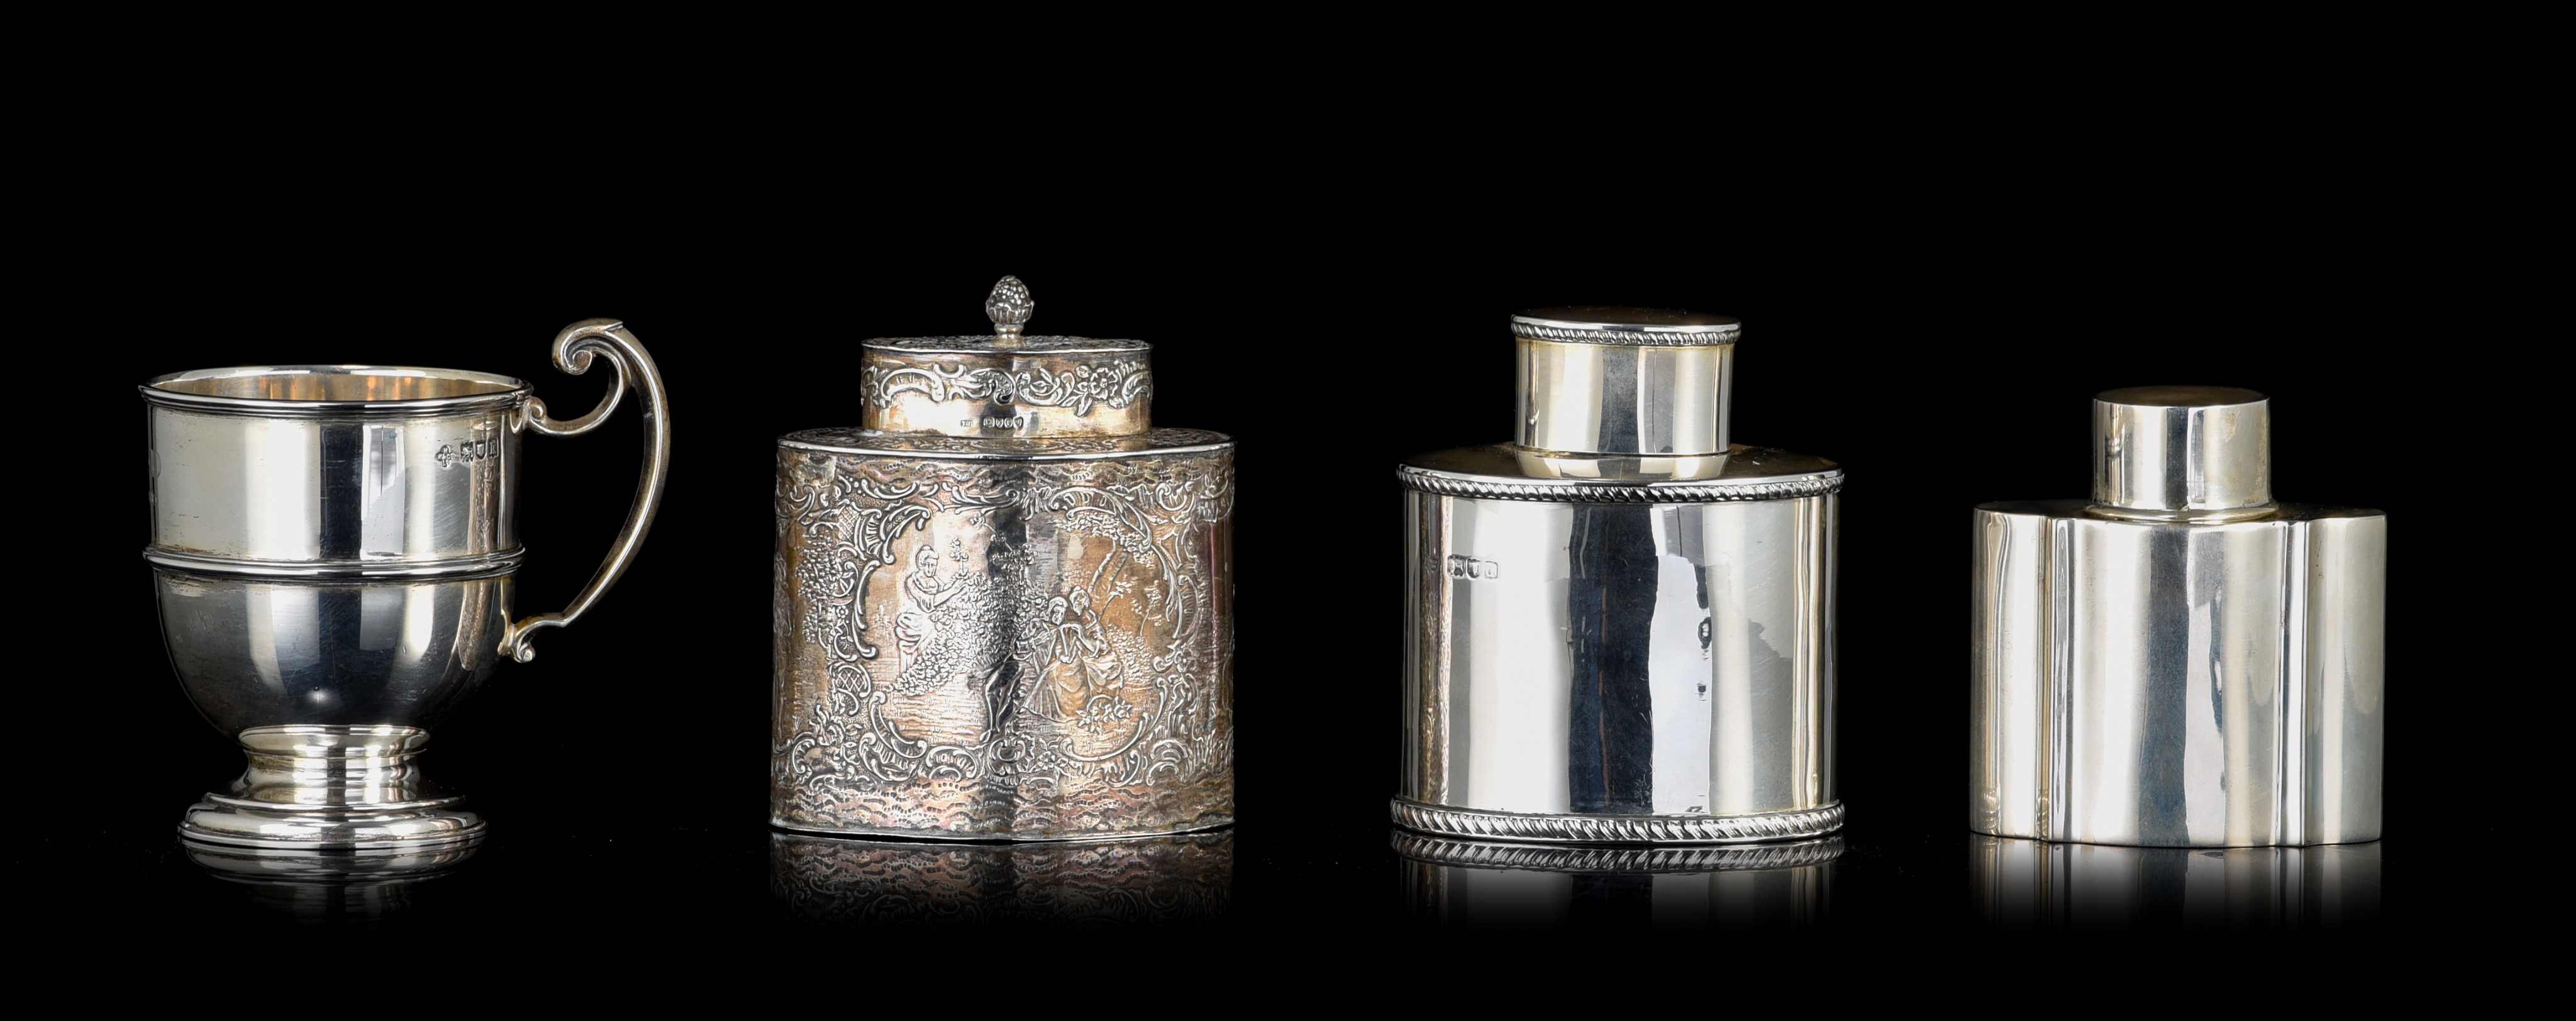 A collection of three tea boxes and a beaker, H 9,5 - 11,5 cm, total weight: ca 720 g